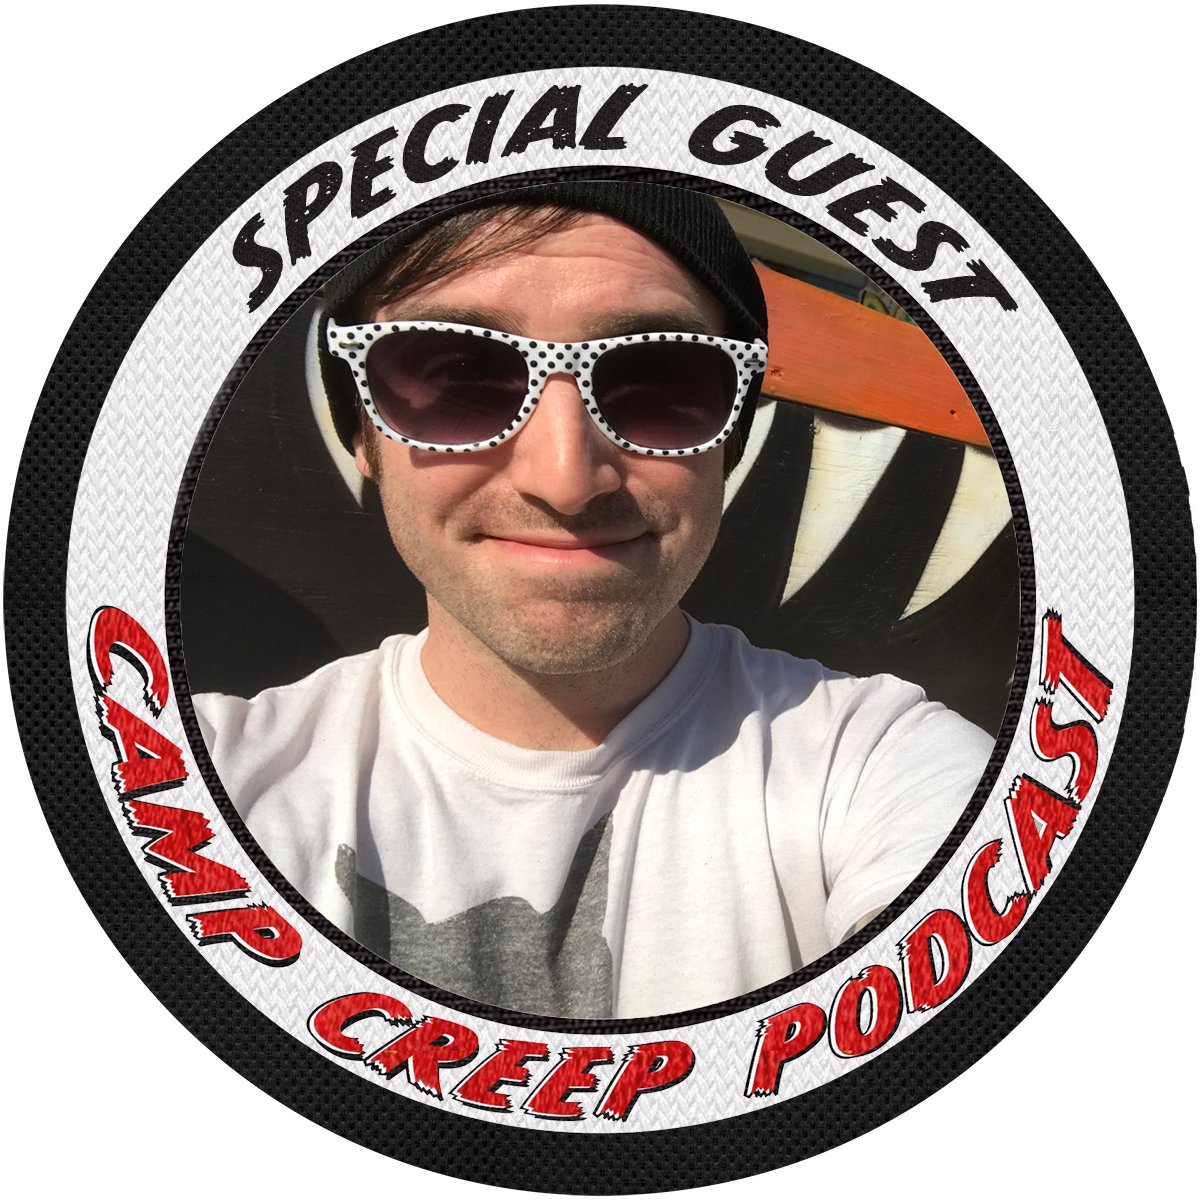 New Episode Alert!
In this super spoopy episode of Camp Creep, the ghouls & Special Guest (Brian Papandrea) discuss old ladies, Al Capone’s vault, & ghost hunting!

#mortondowneyjr #talesfromthecrypt #cryptkeeper #horror #podcast #campcreep #creepitreal #joyroadmedia